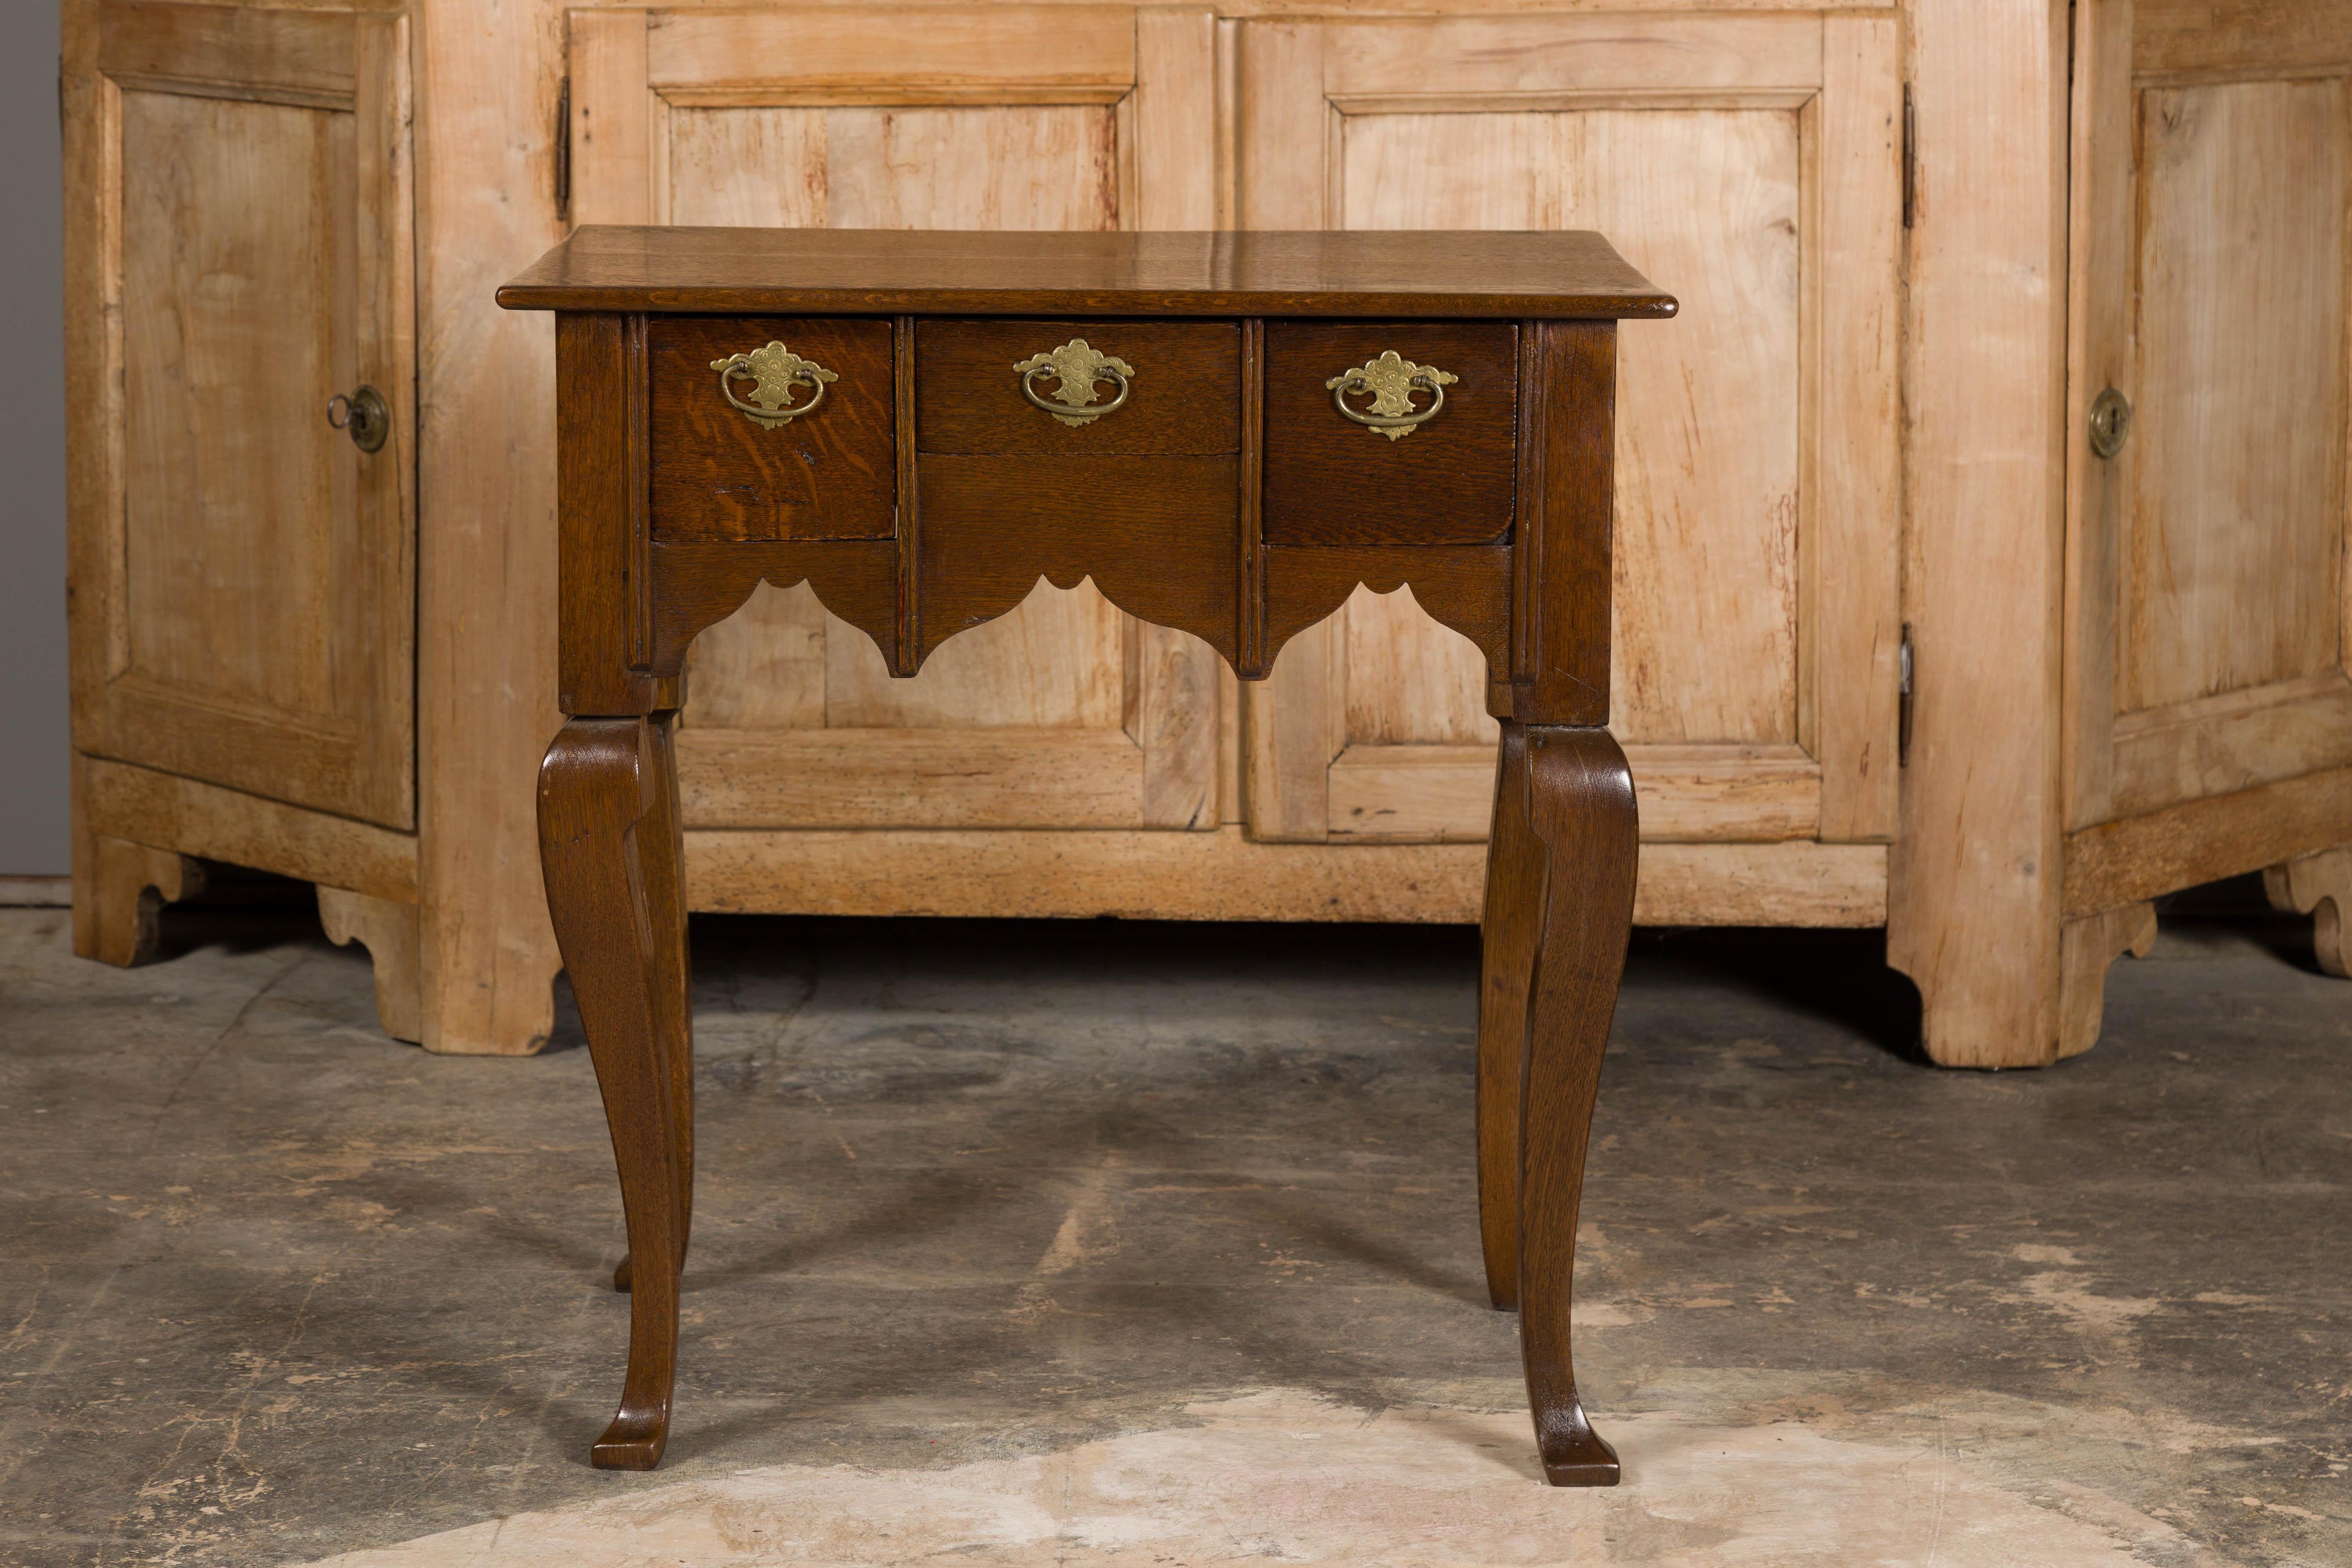 Carved English Georgian 19th Century Oak Table with Three Drawers and Cabriole Legs For Sale